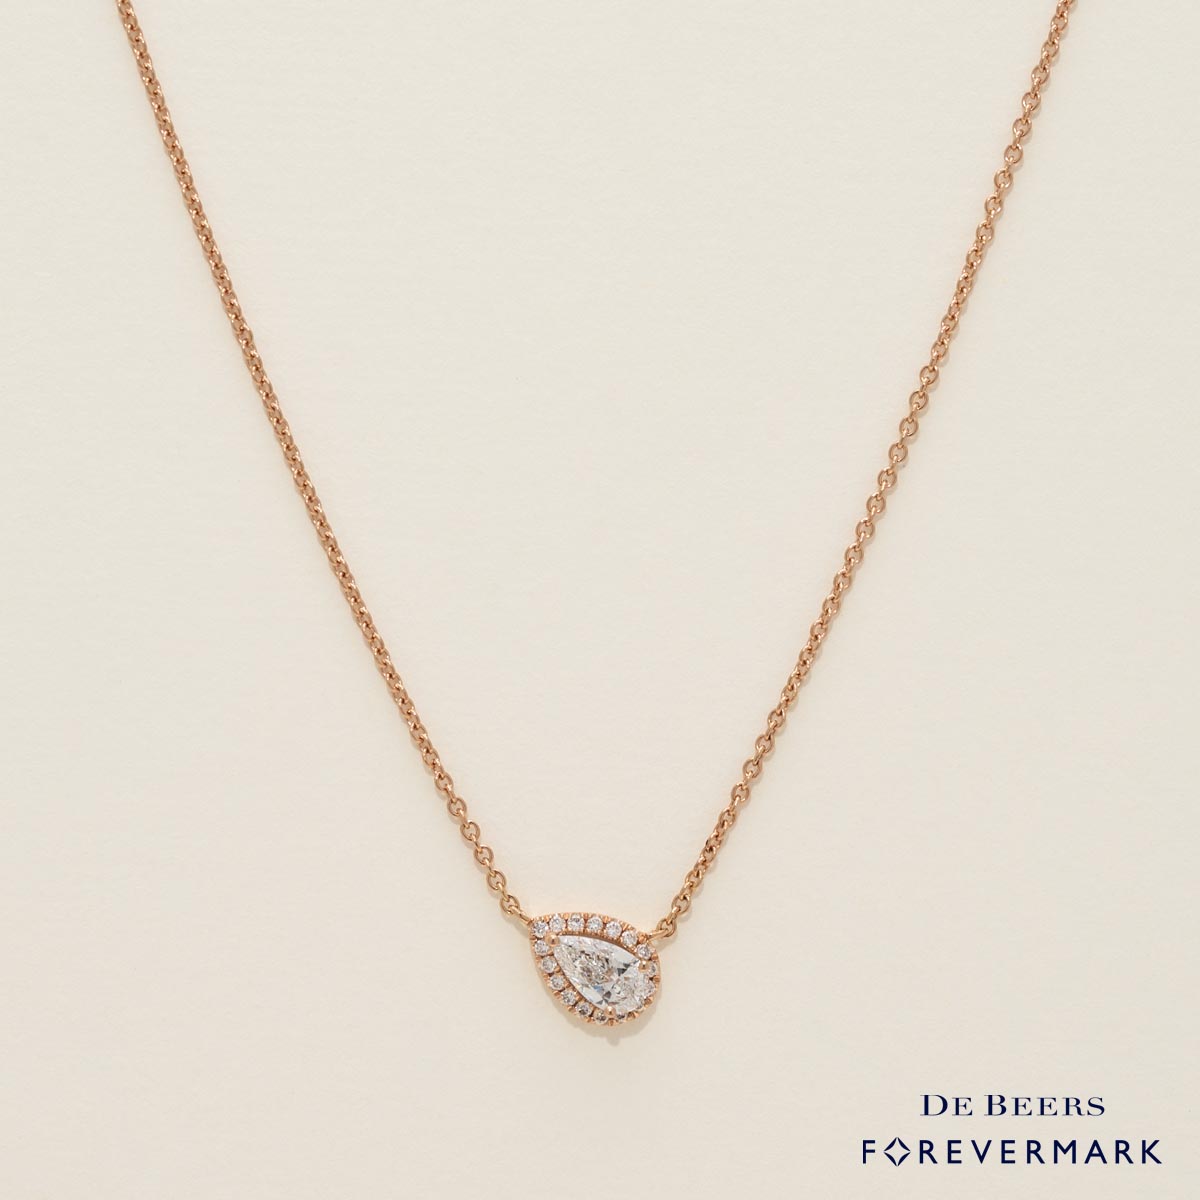 De Beers Forevermark Center of my Universe Pear Shaped Diamond Halo Necklace in 18kt Rose Gold (3/8ct tw)